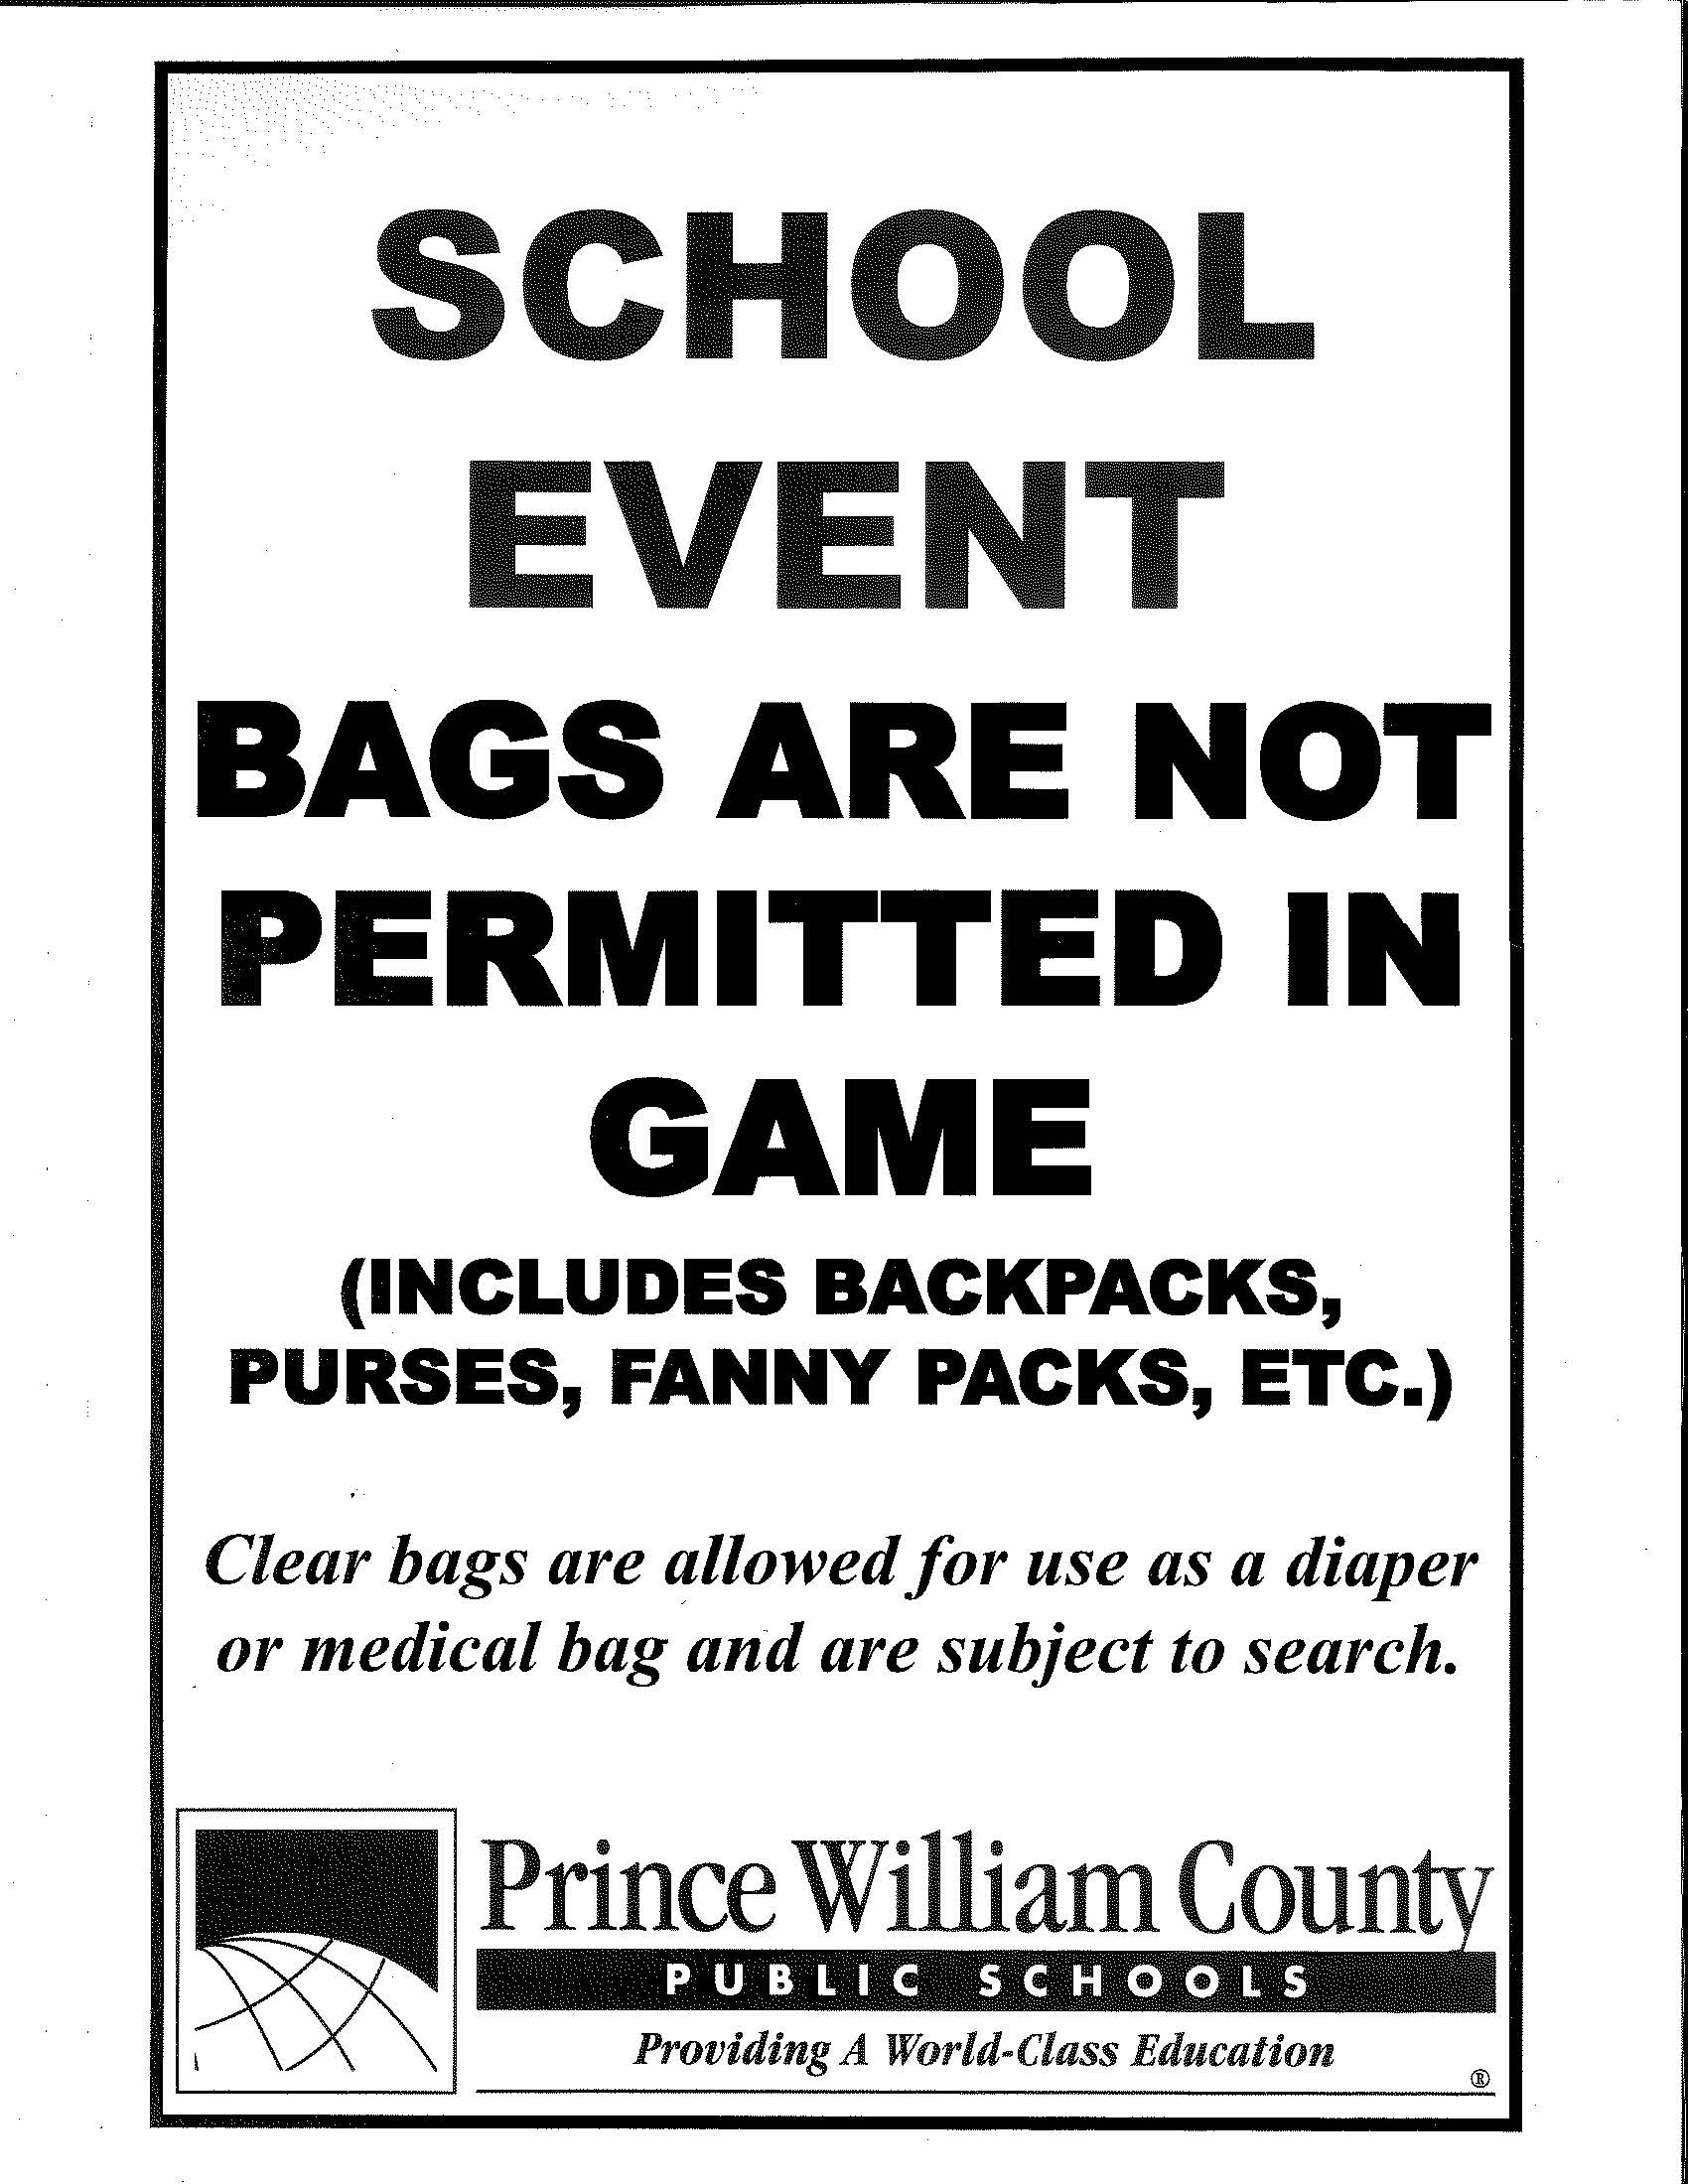 Bags-not-Permitted-at-Games-003.jpg